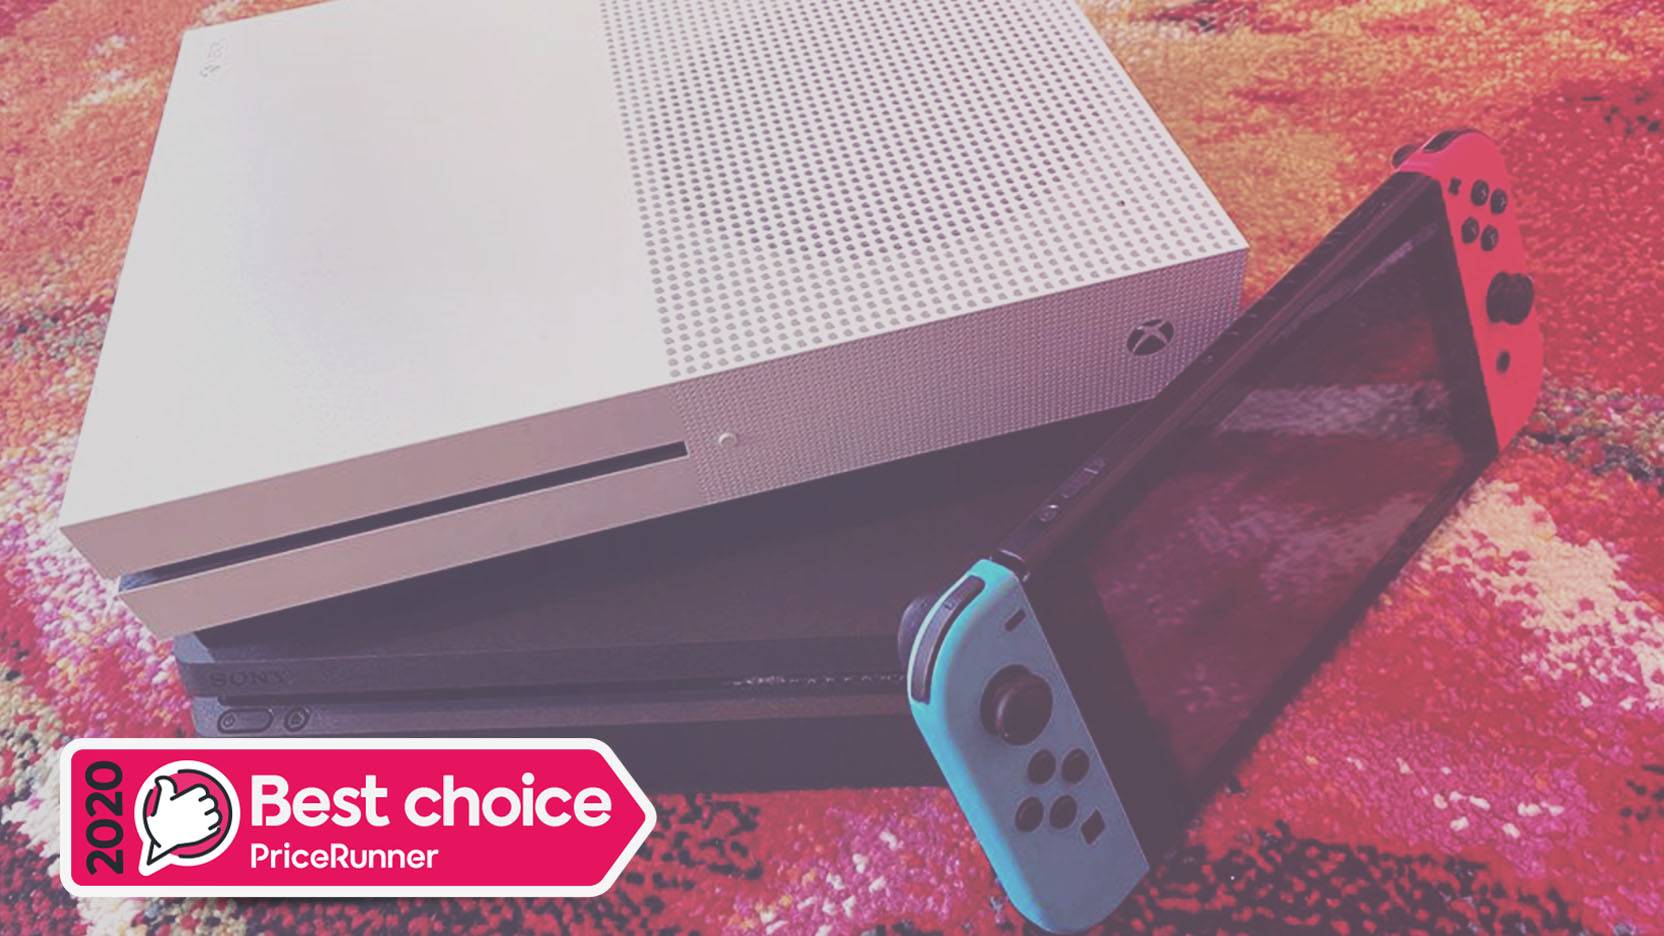 which games console is best for families